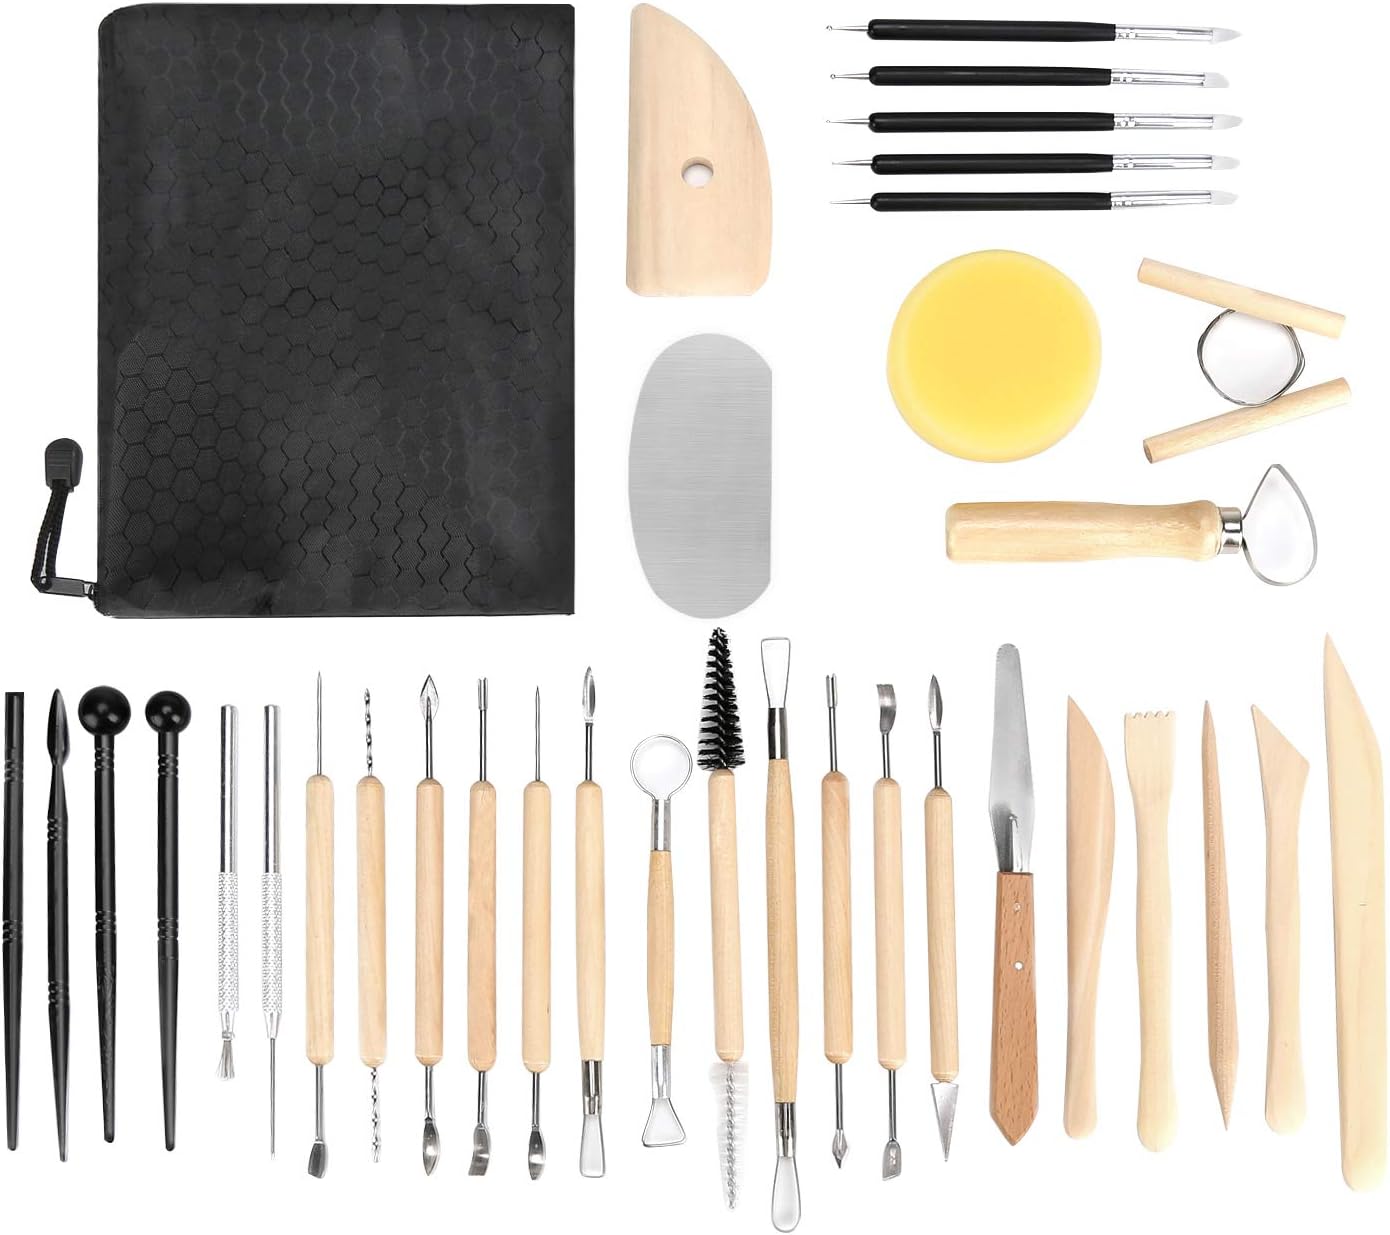 Blisstime 34PCS Clay Tools,Pottery Sculpting Tool and Supplies,Wooden Handle Pottery Carving Tool Set